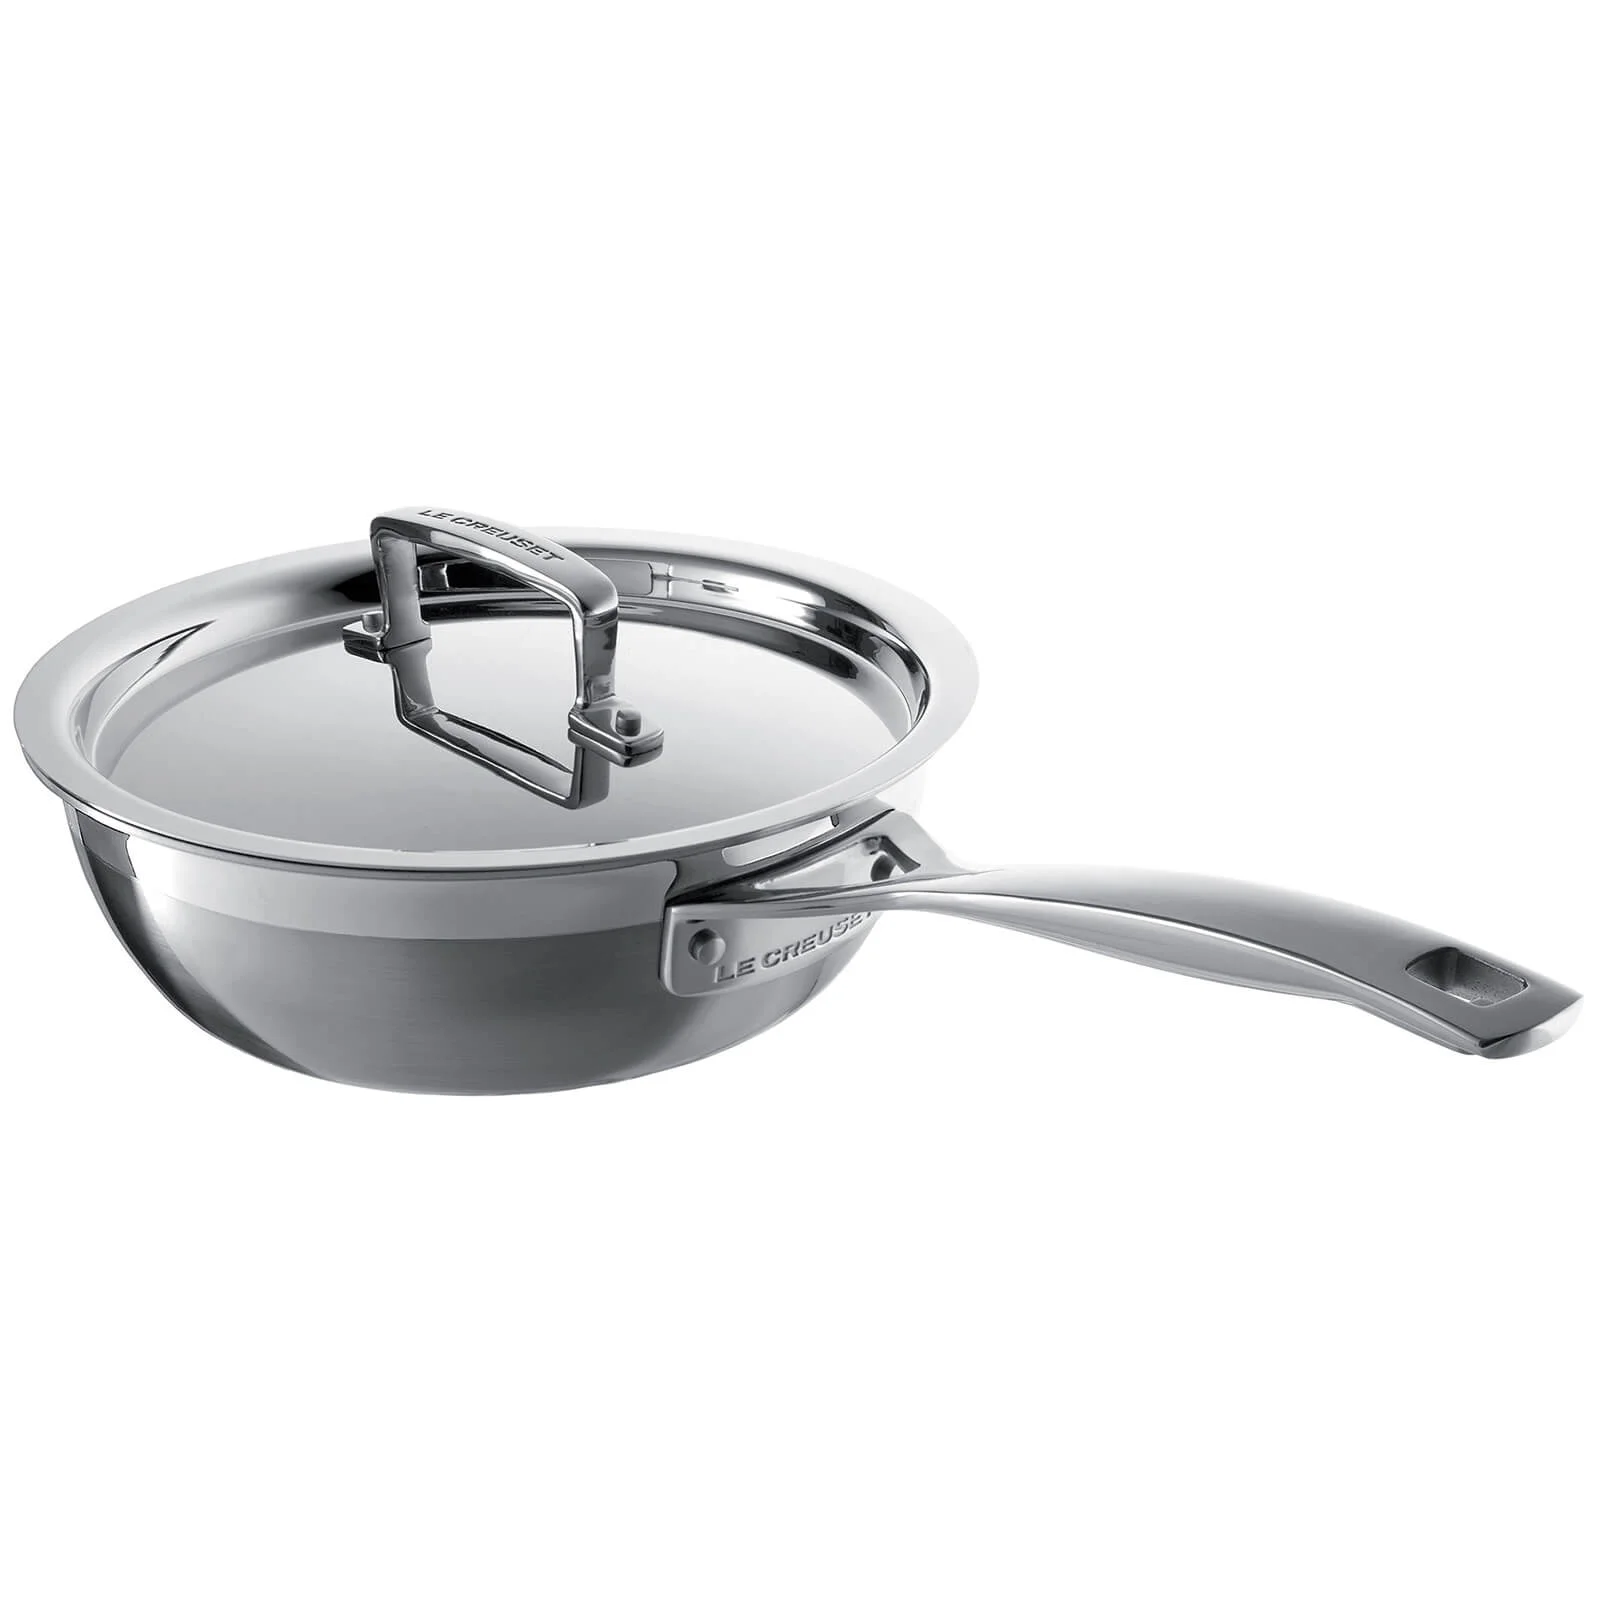 Le Creuset 3-Ply Stainless Steel Chef's Pan - 20cm Image 1